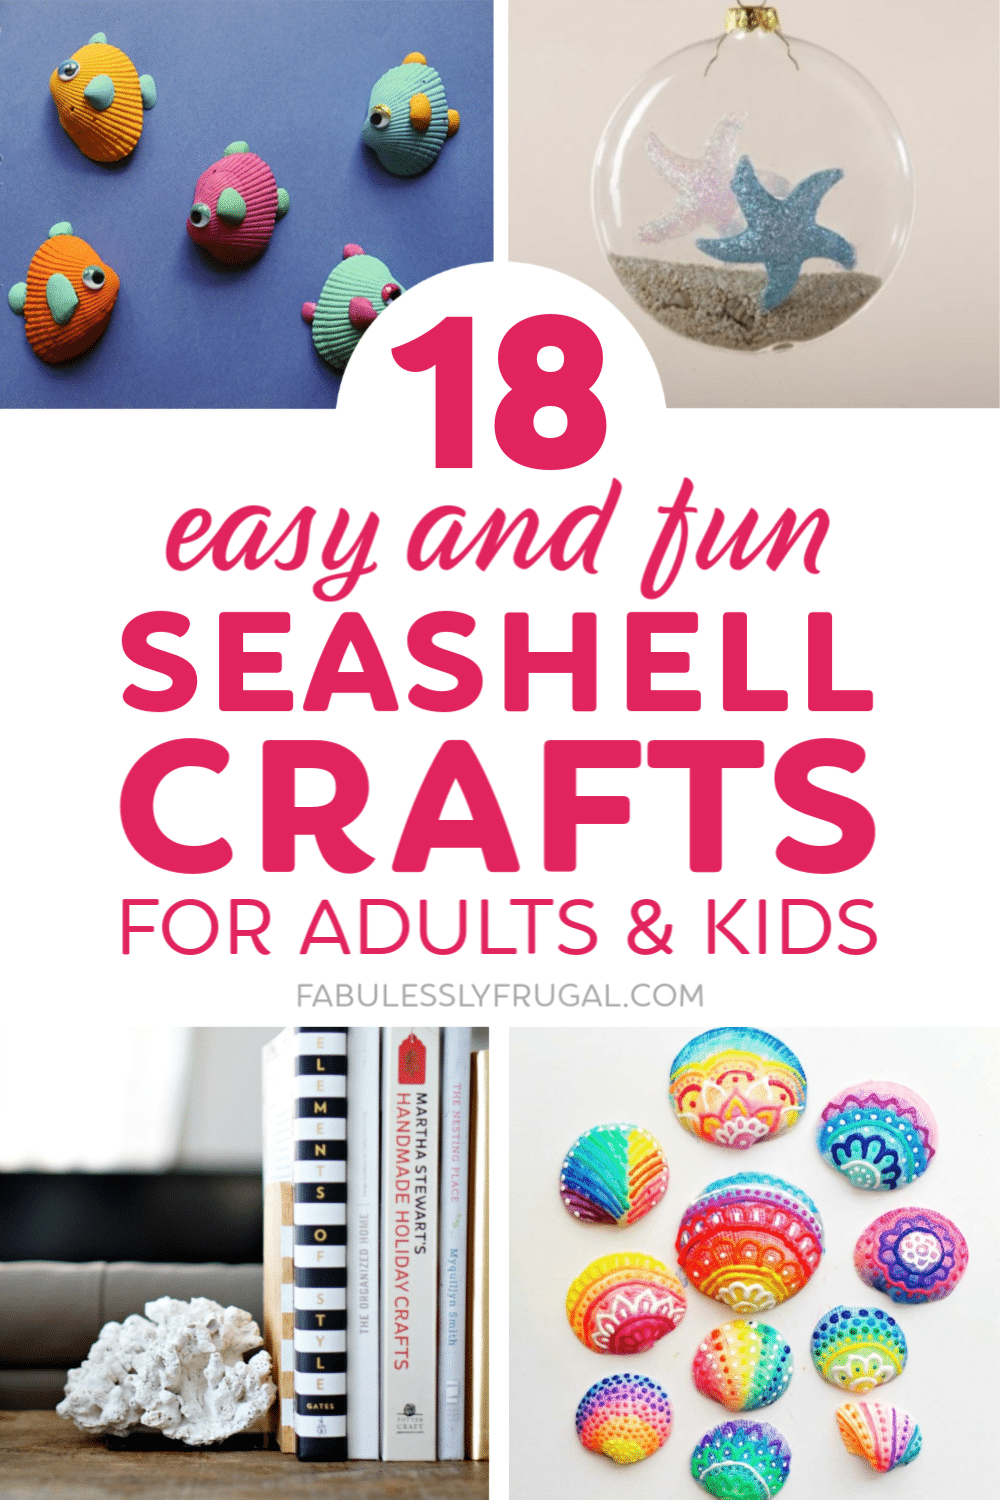 Easy seashell crafts for adults and kids